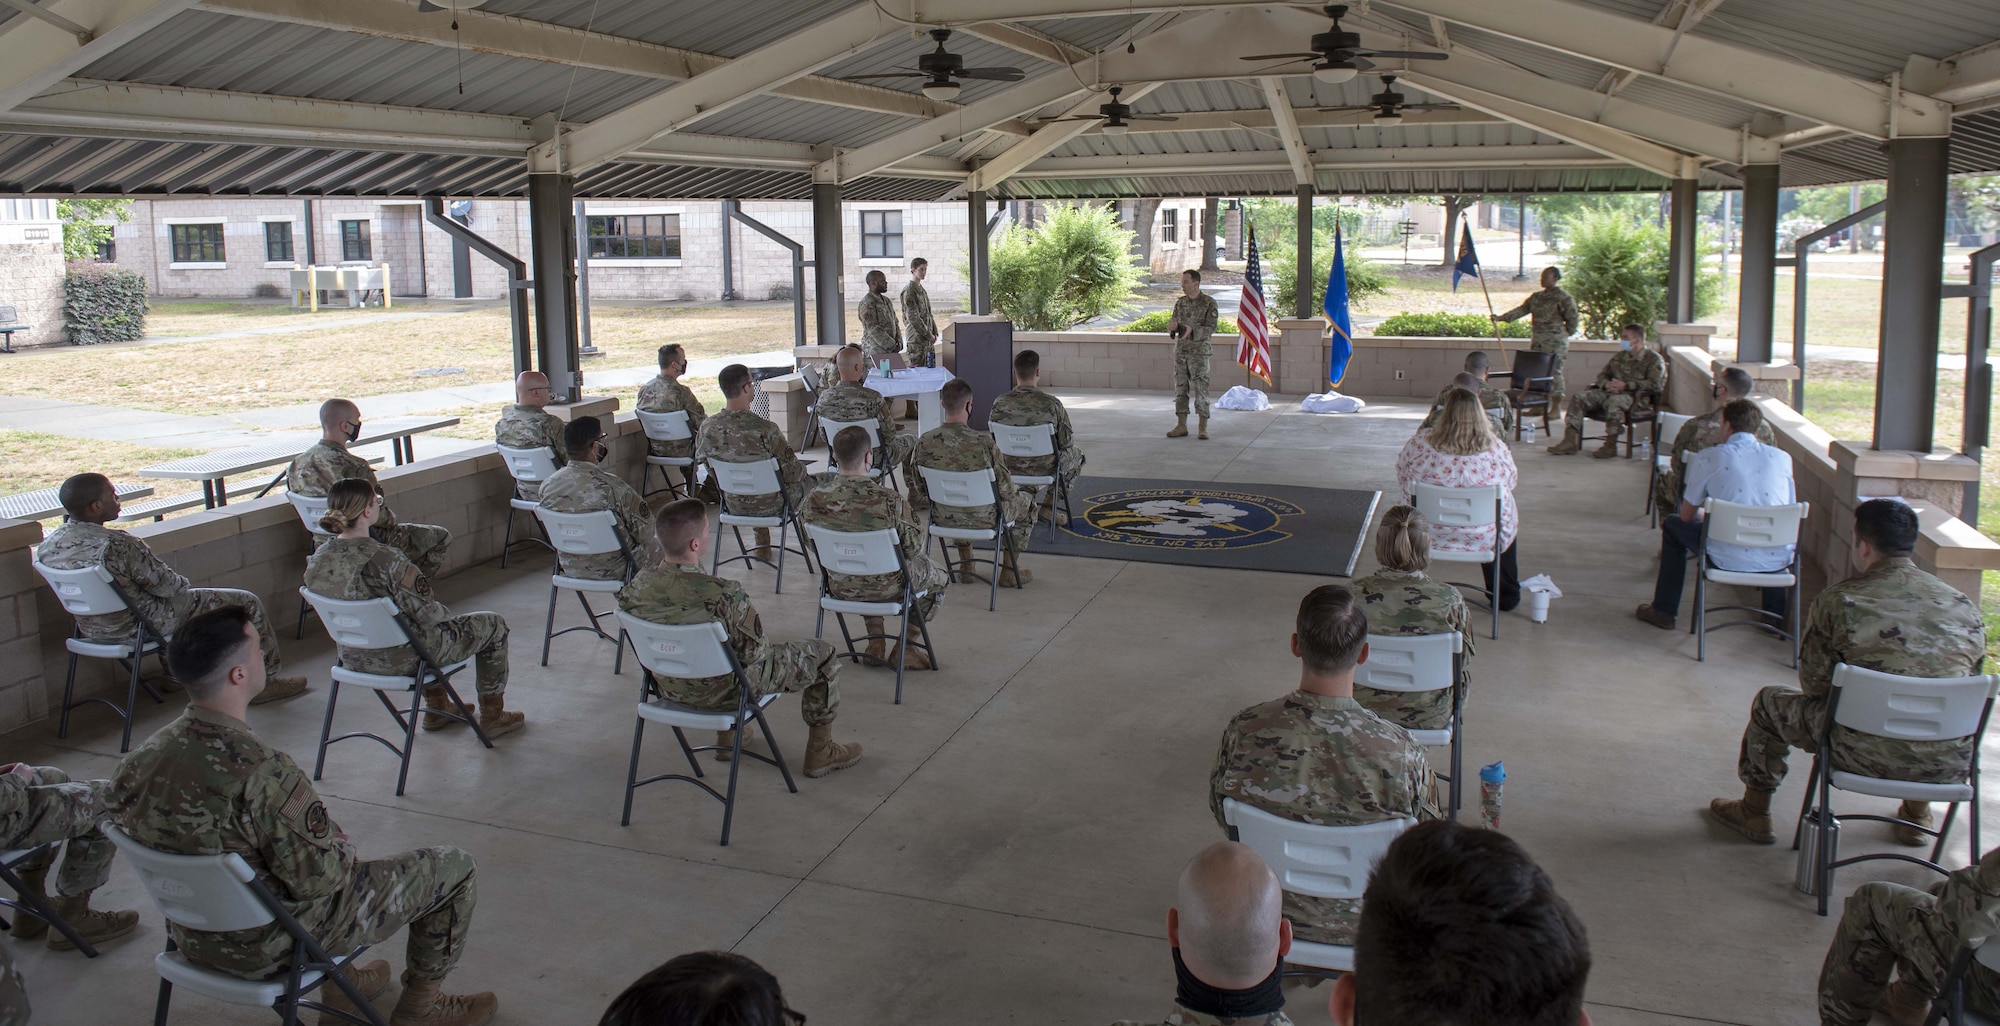 Col. Bradley Stebbins, 1st Weather Group commander, addresses patrons at the 28th Operational Weather Squadron during an assumption of command ceremony on June 2, 2021, at Shaw Air Force Base, South Carolina.